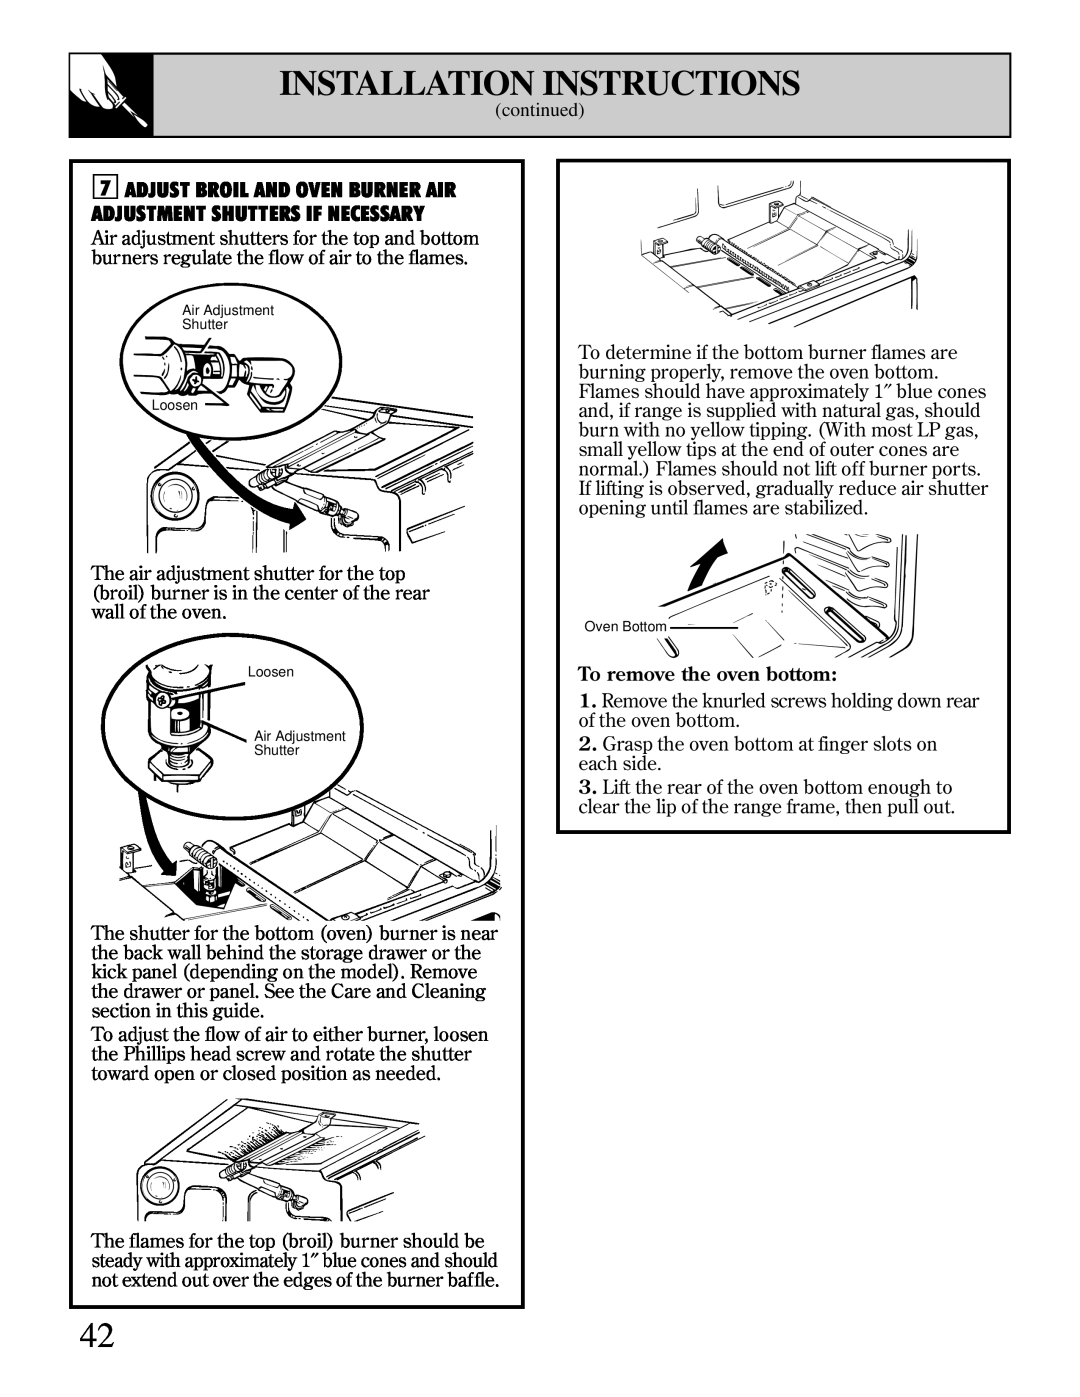 Hotpoint RGB744 installation instructions Installation Instructions, To remove the oven bottom 